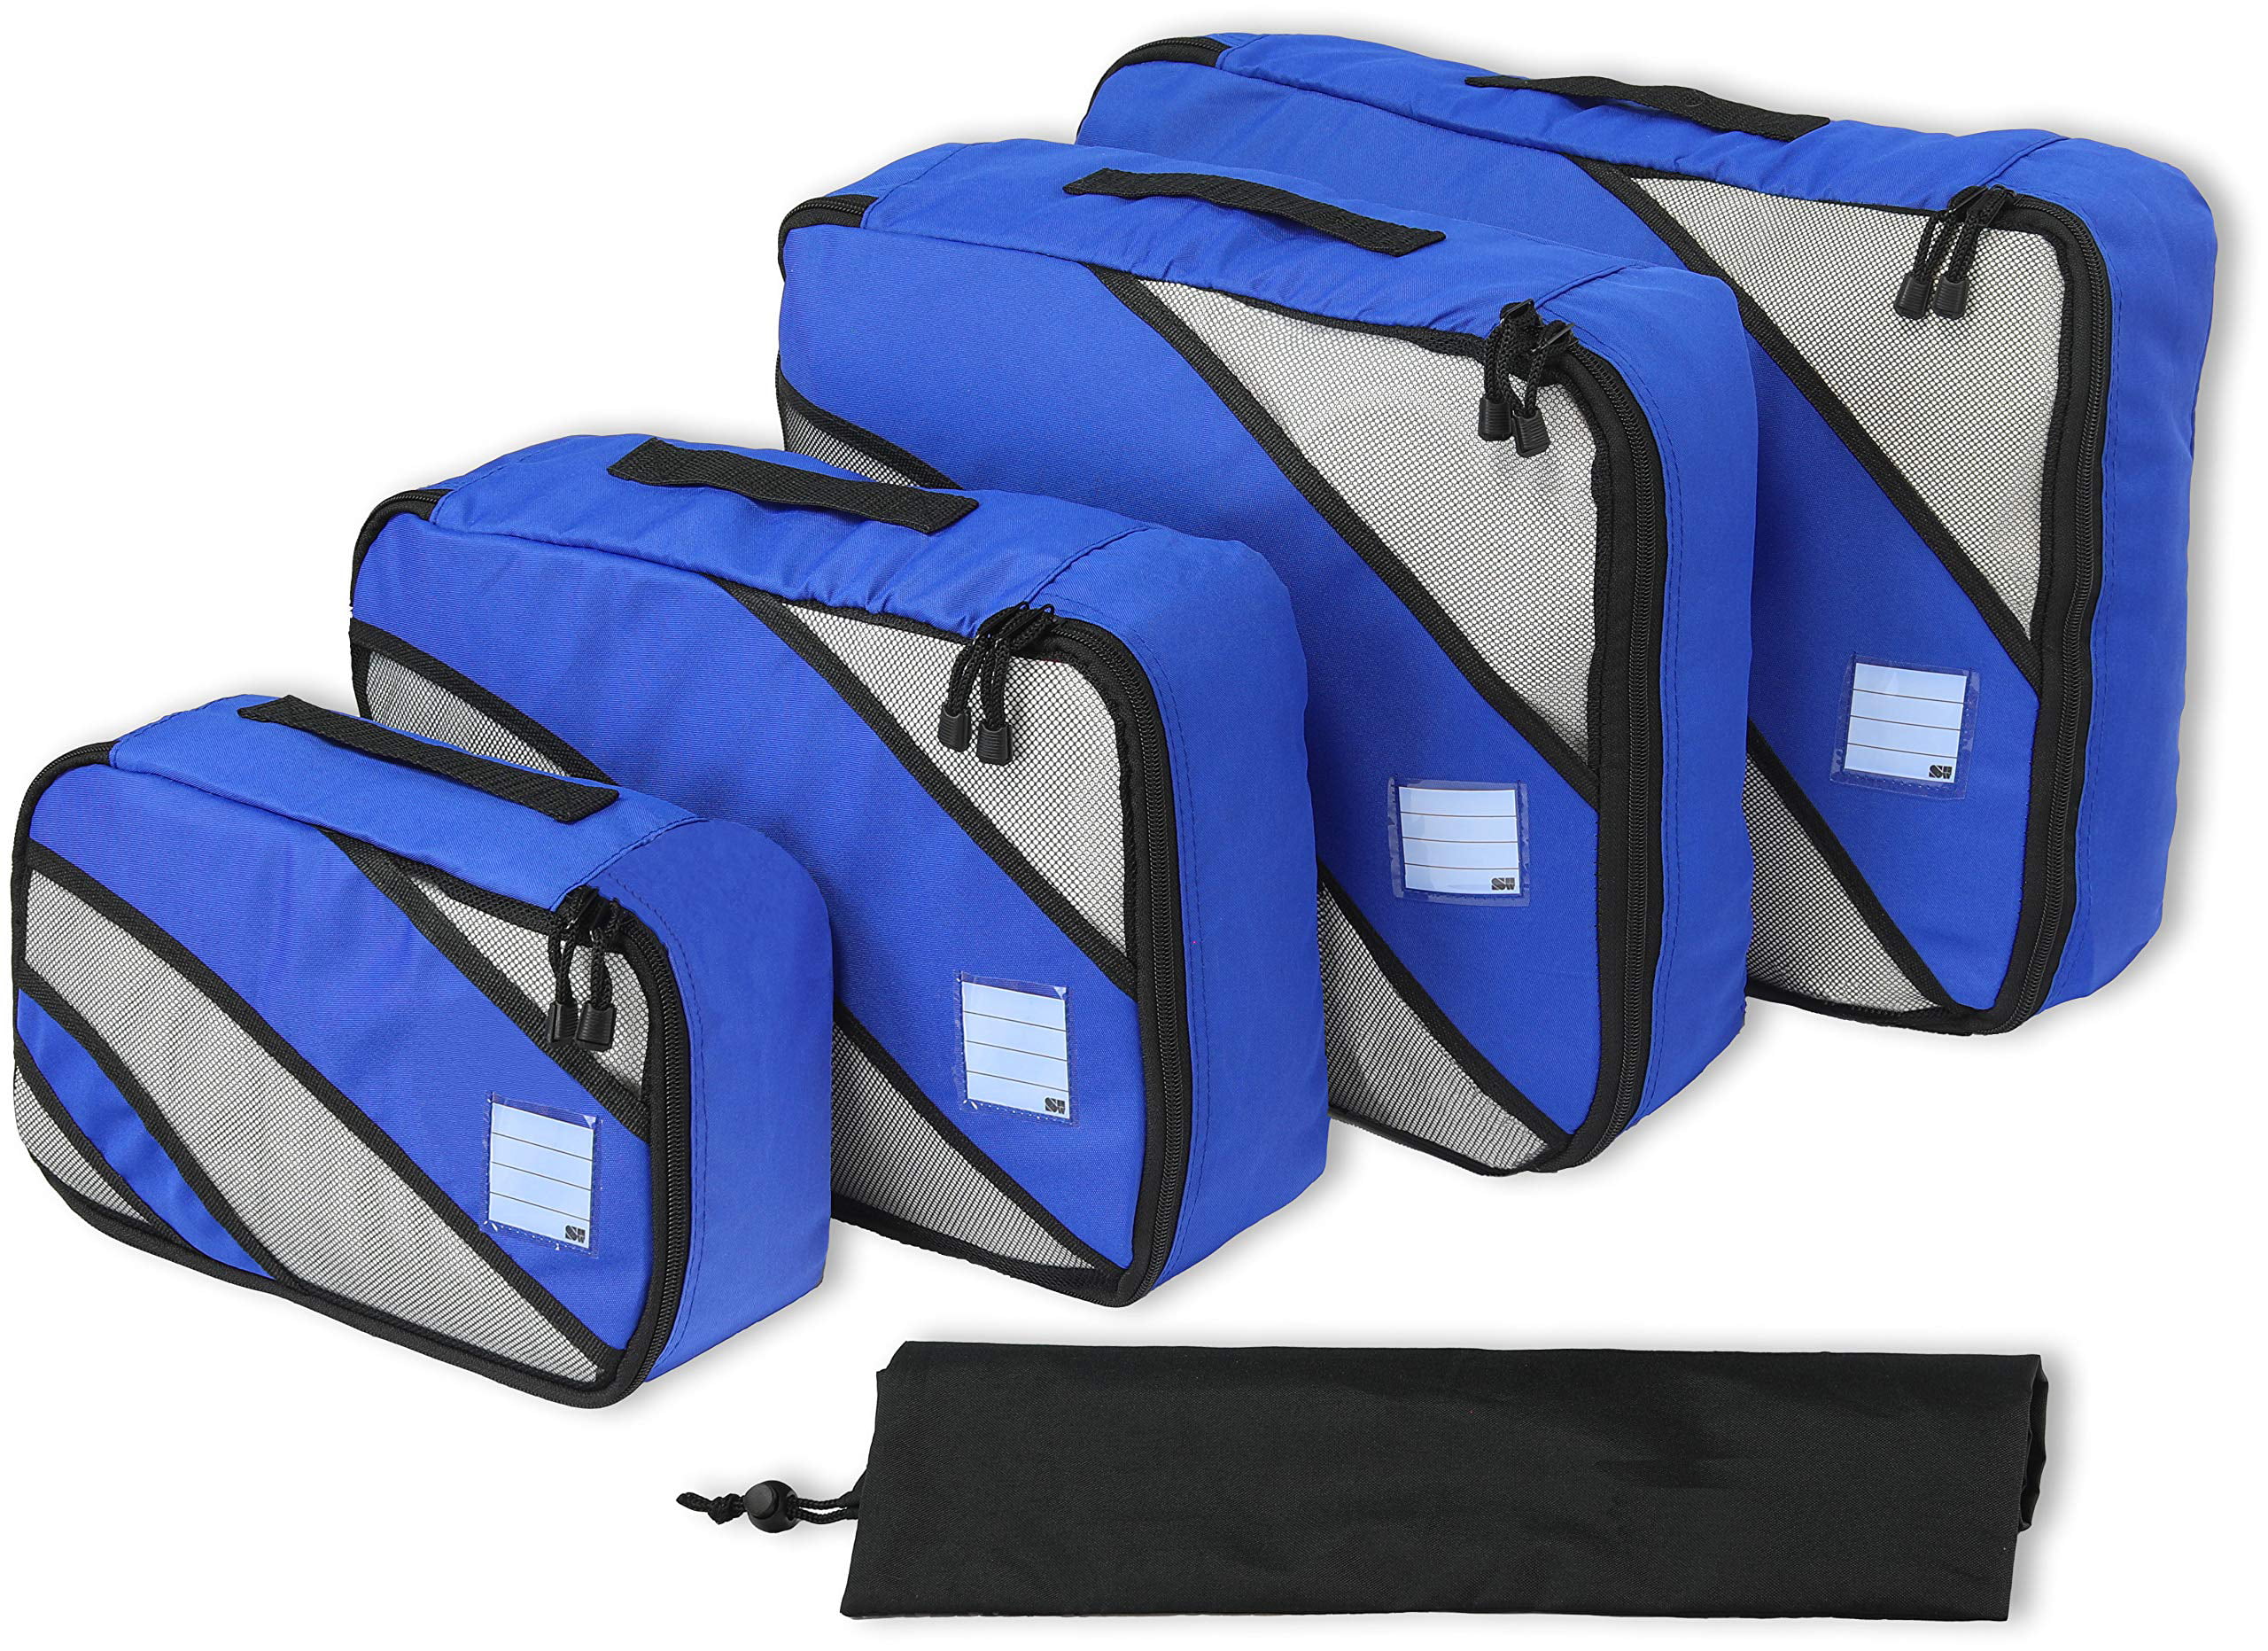 Blue Travel Packing Organizers with Laundry Bag - Set of 4